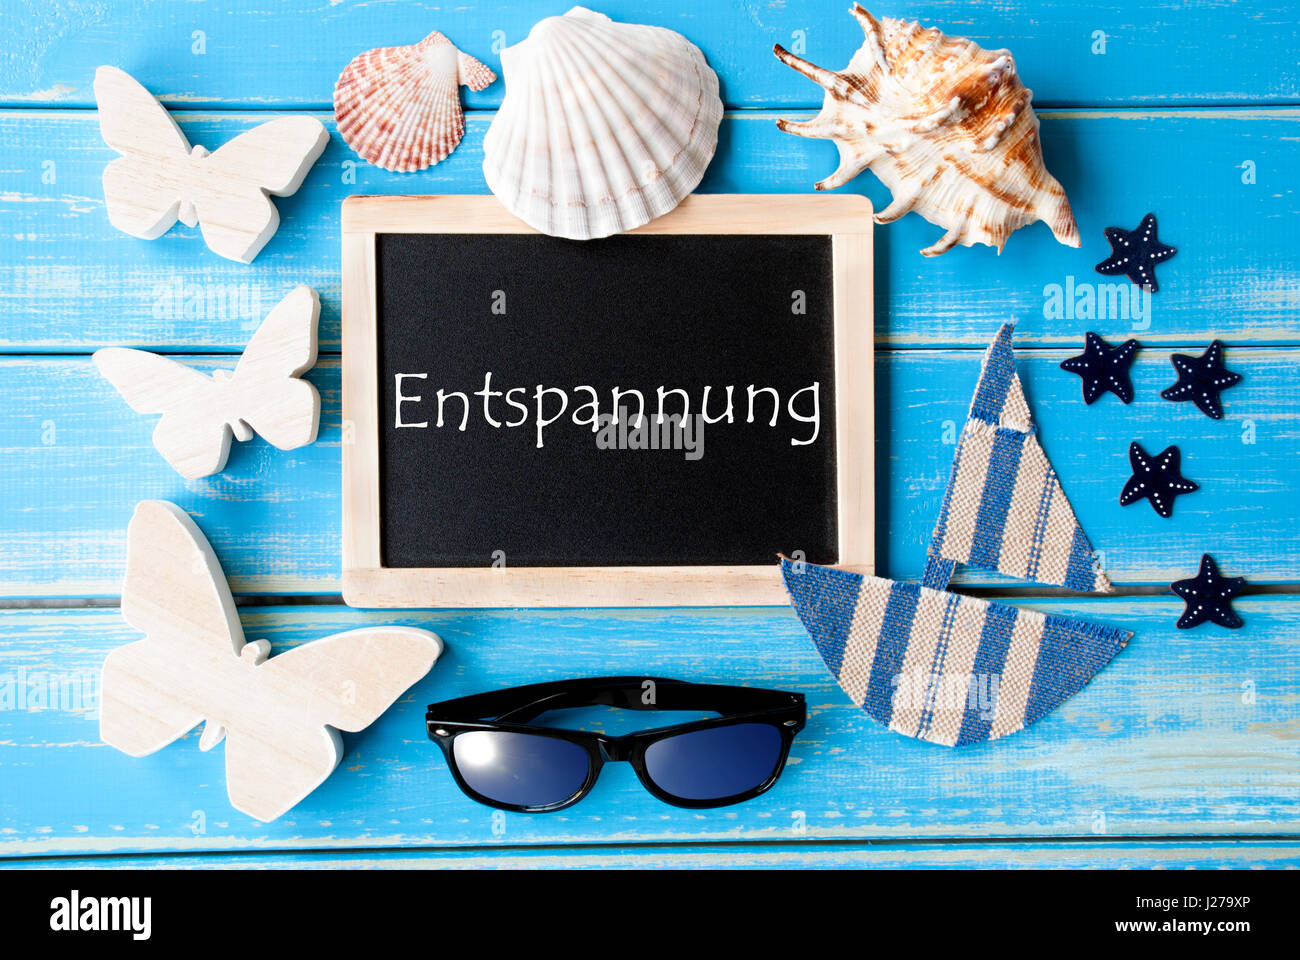 Blackboard With Maritime Decoration, Entspannung Means Relax Stock Photo